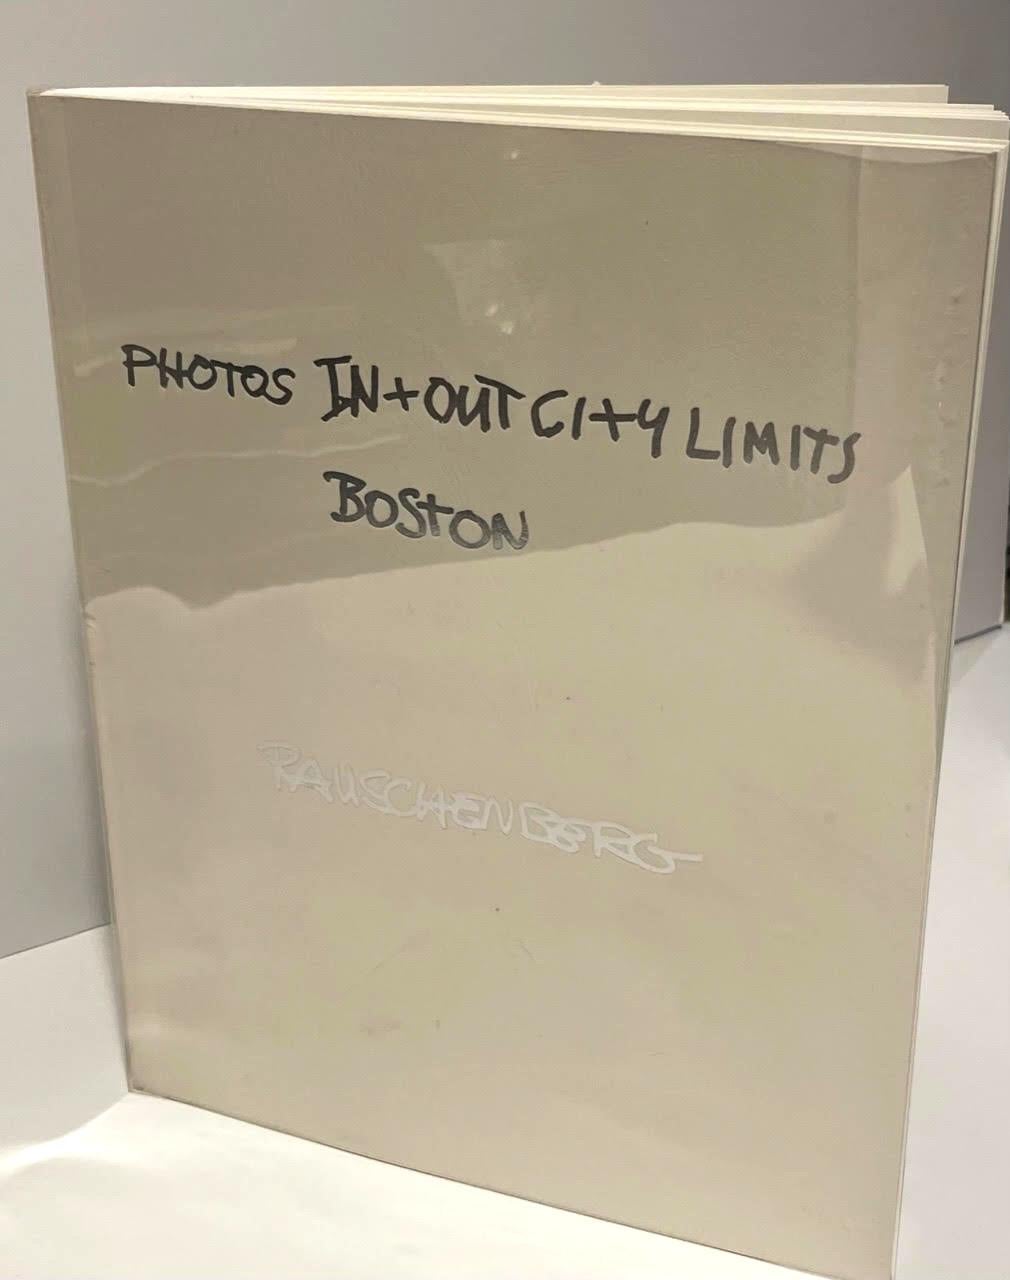 Photos In+Out City Limits: Boston (hand signed by Robert Rauschenberg) Boxed Set For Sale 19